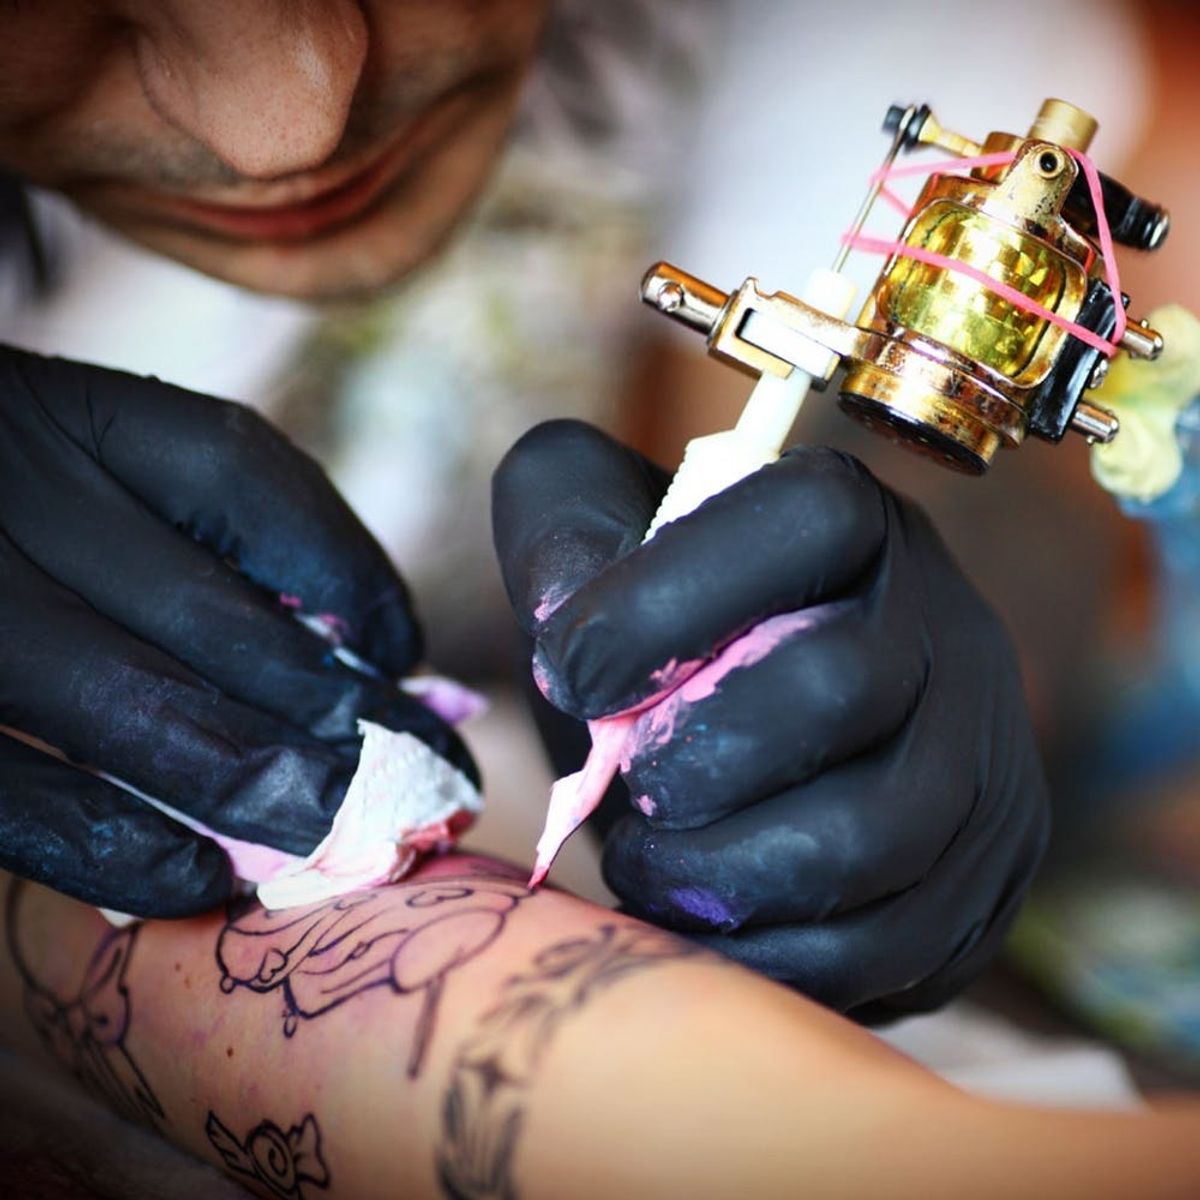 WTF: This Tattoo Craze Is Seriously Surprising